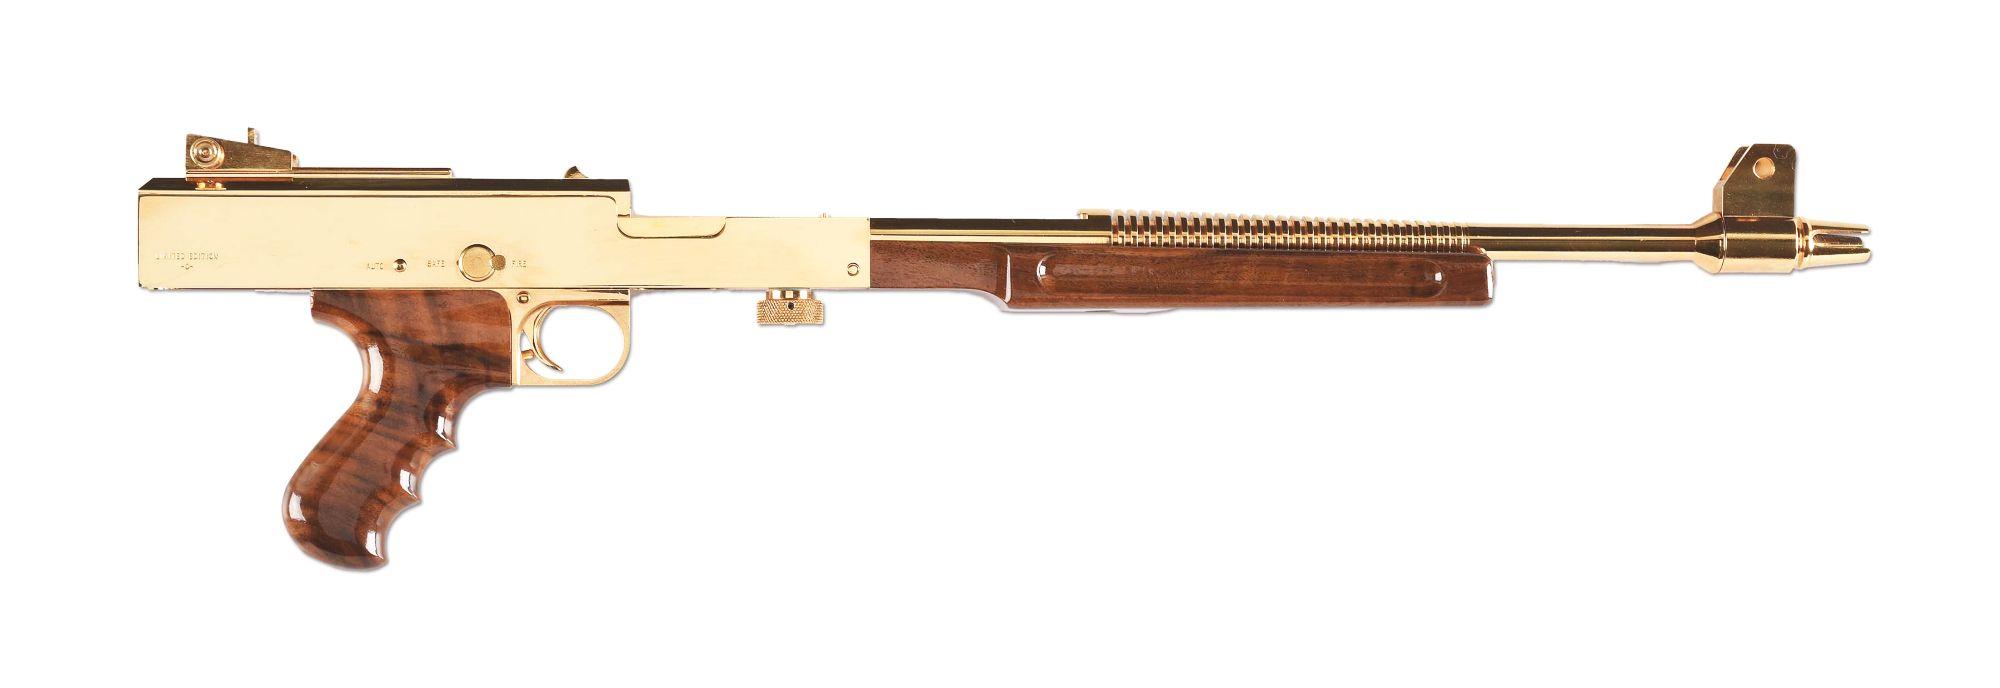 (N) Absolutely Magnificent UNFIRED Gold M-2 Limited Edition American Arms – American 180 Machine Gun